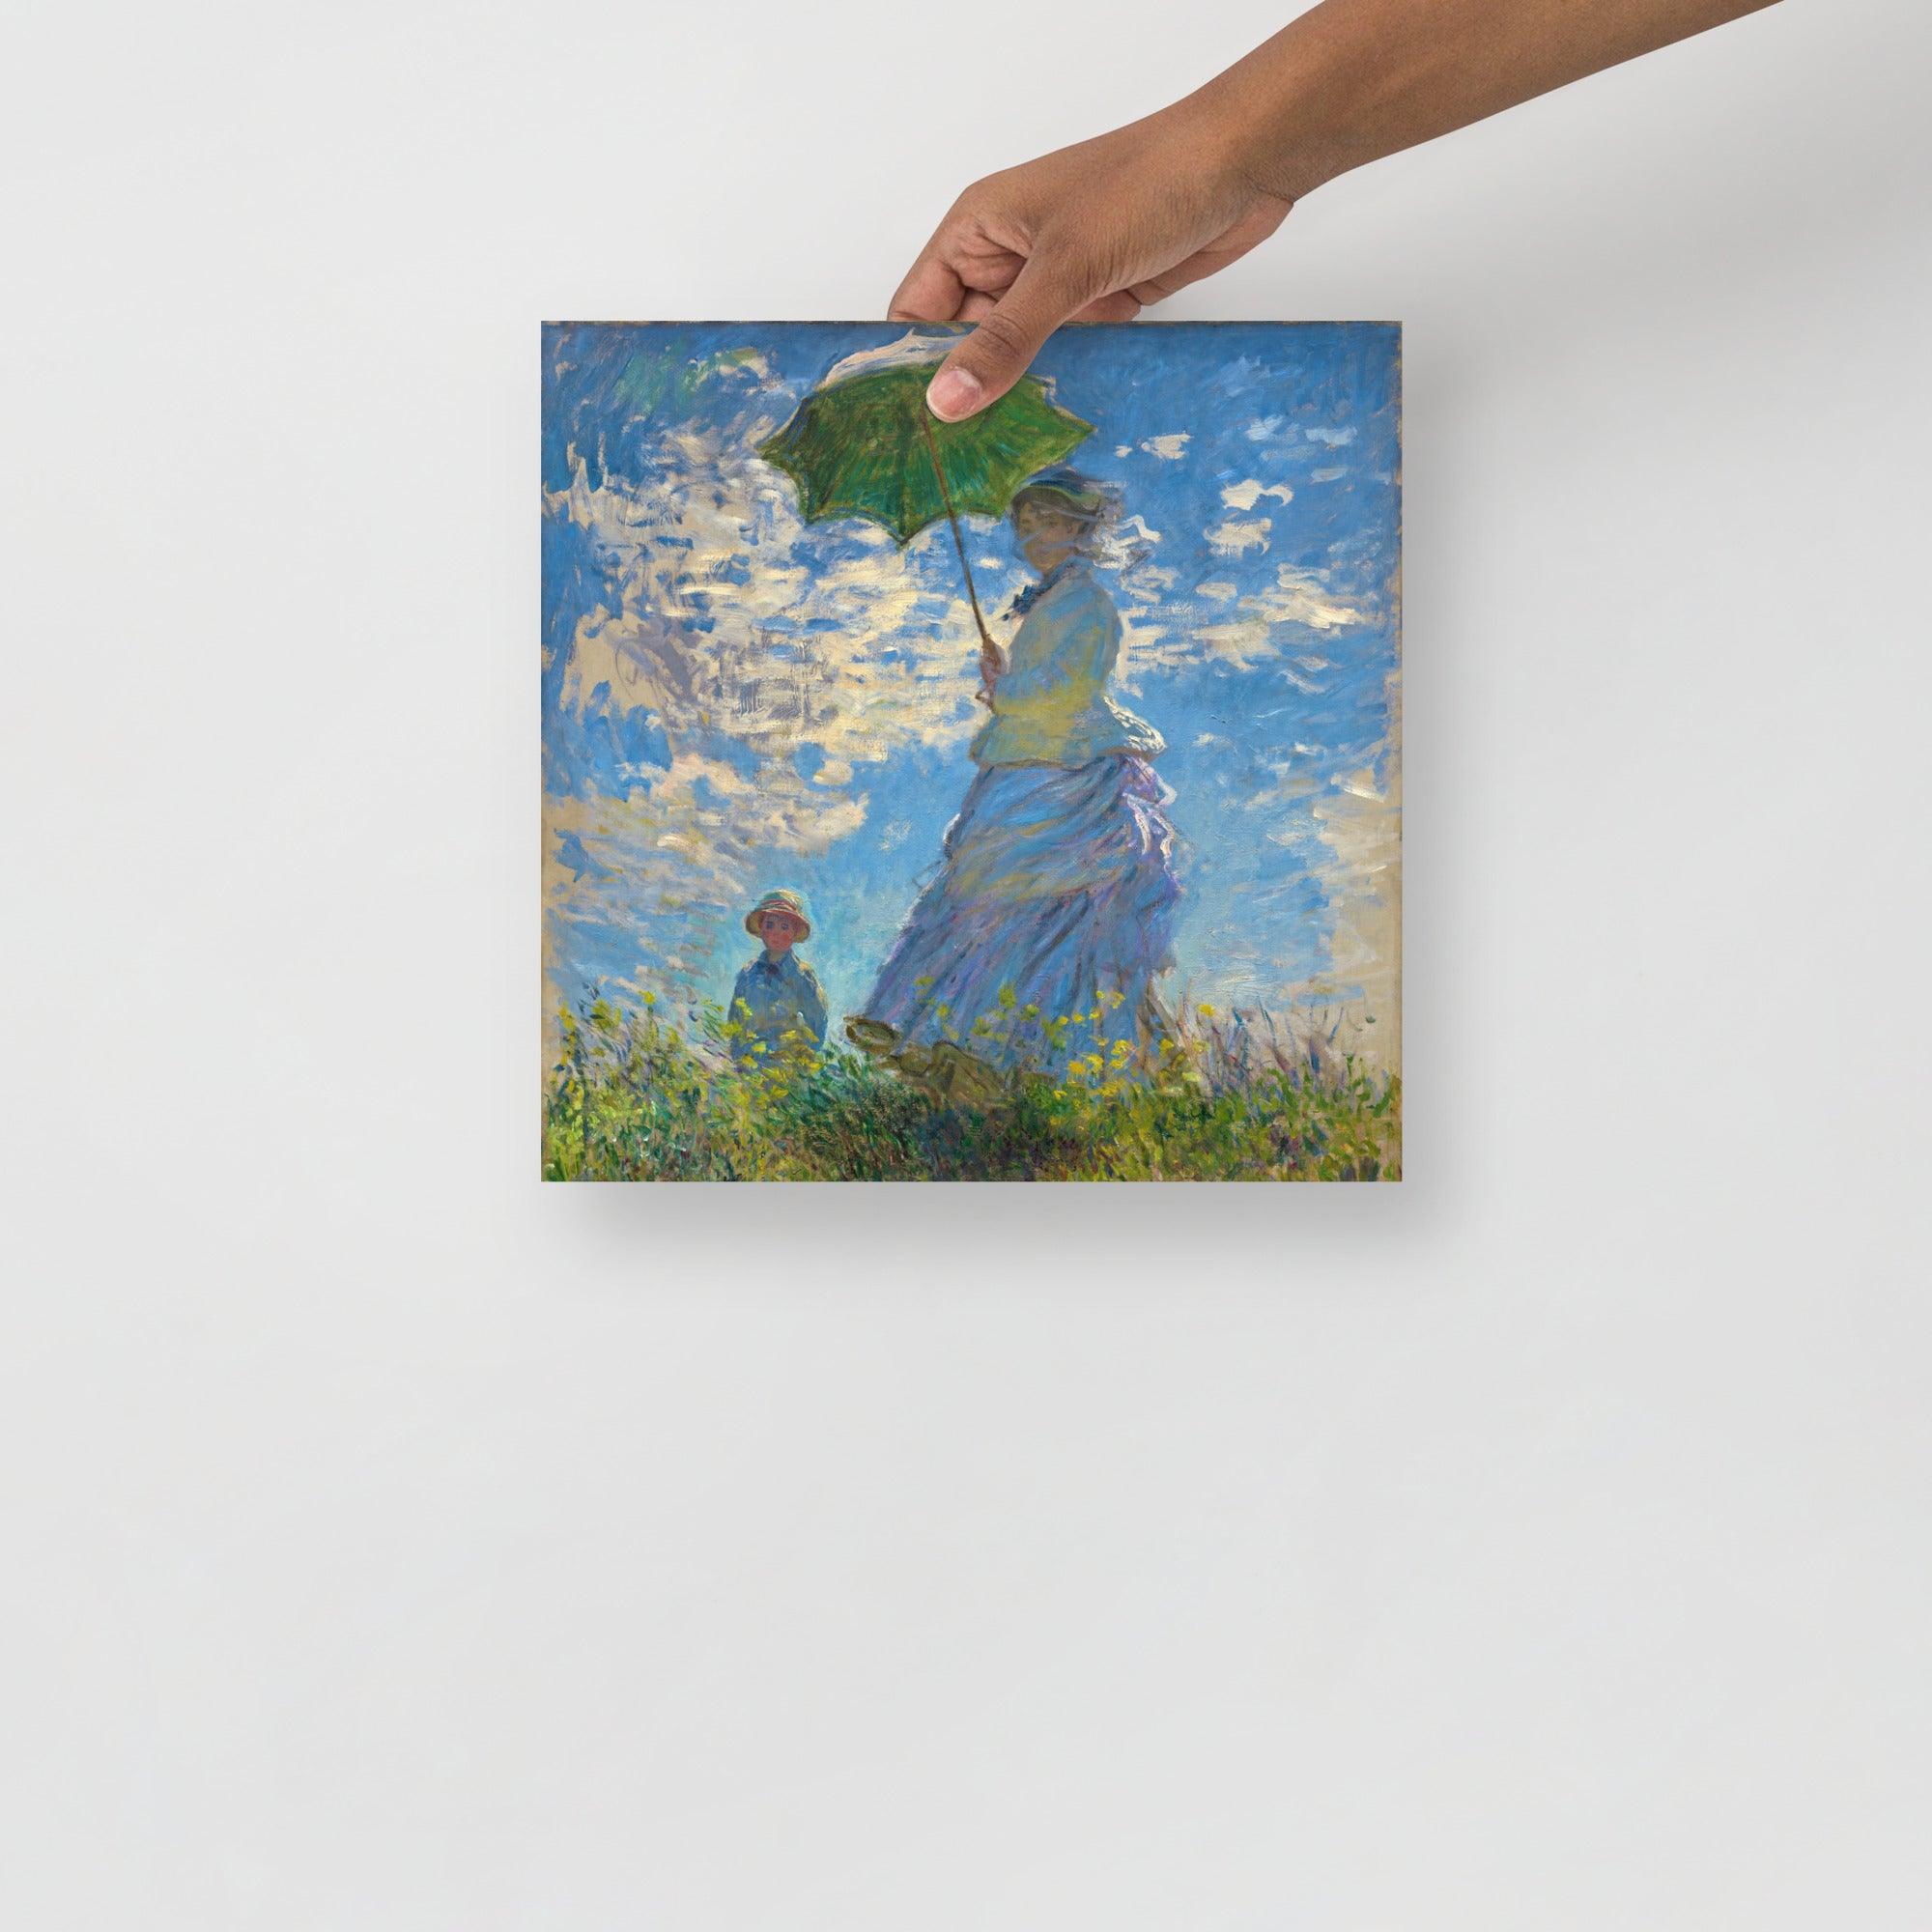 A Madame Monet and Her Son by Claude Monet poster on a plain backdrop in size 12x12”.